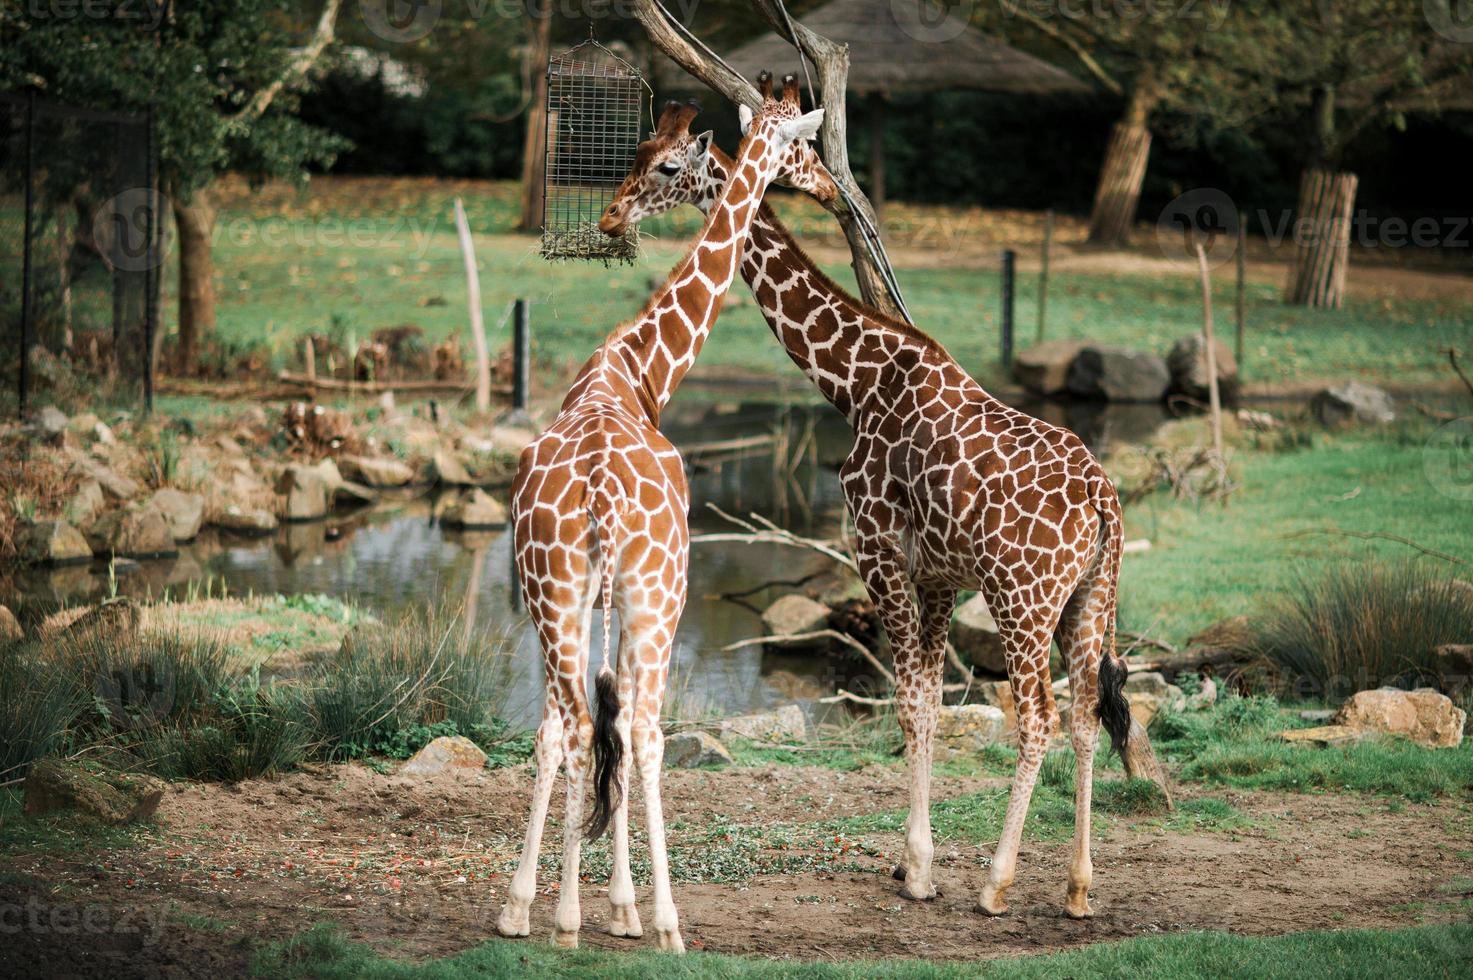 Giraffes at the zoo by the pond photo